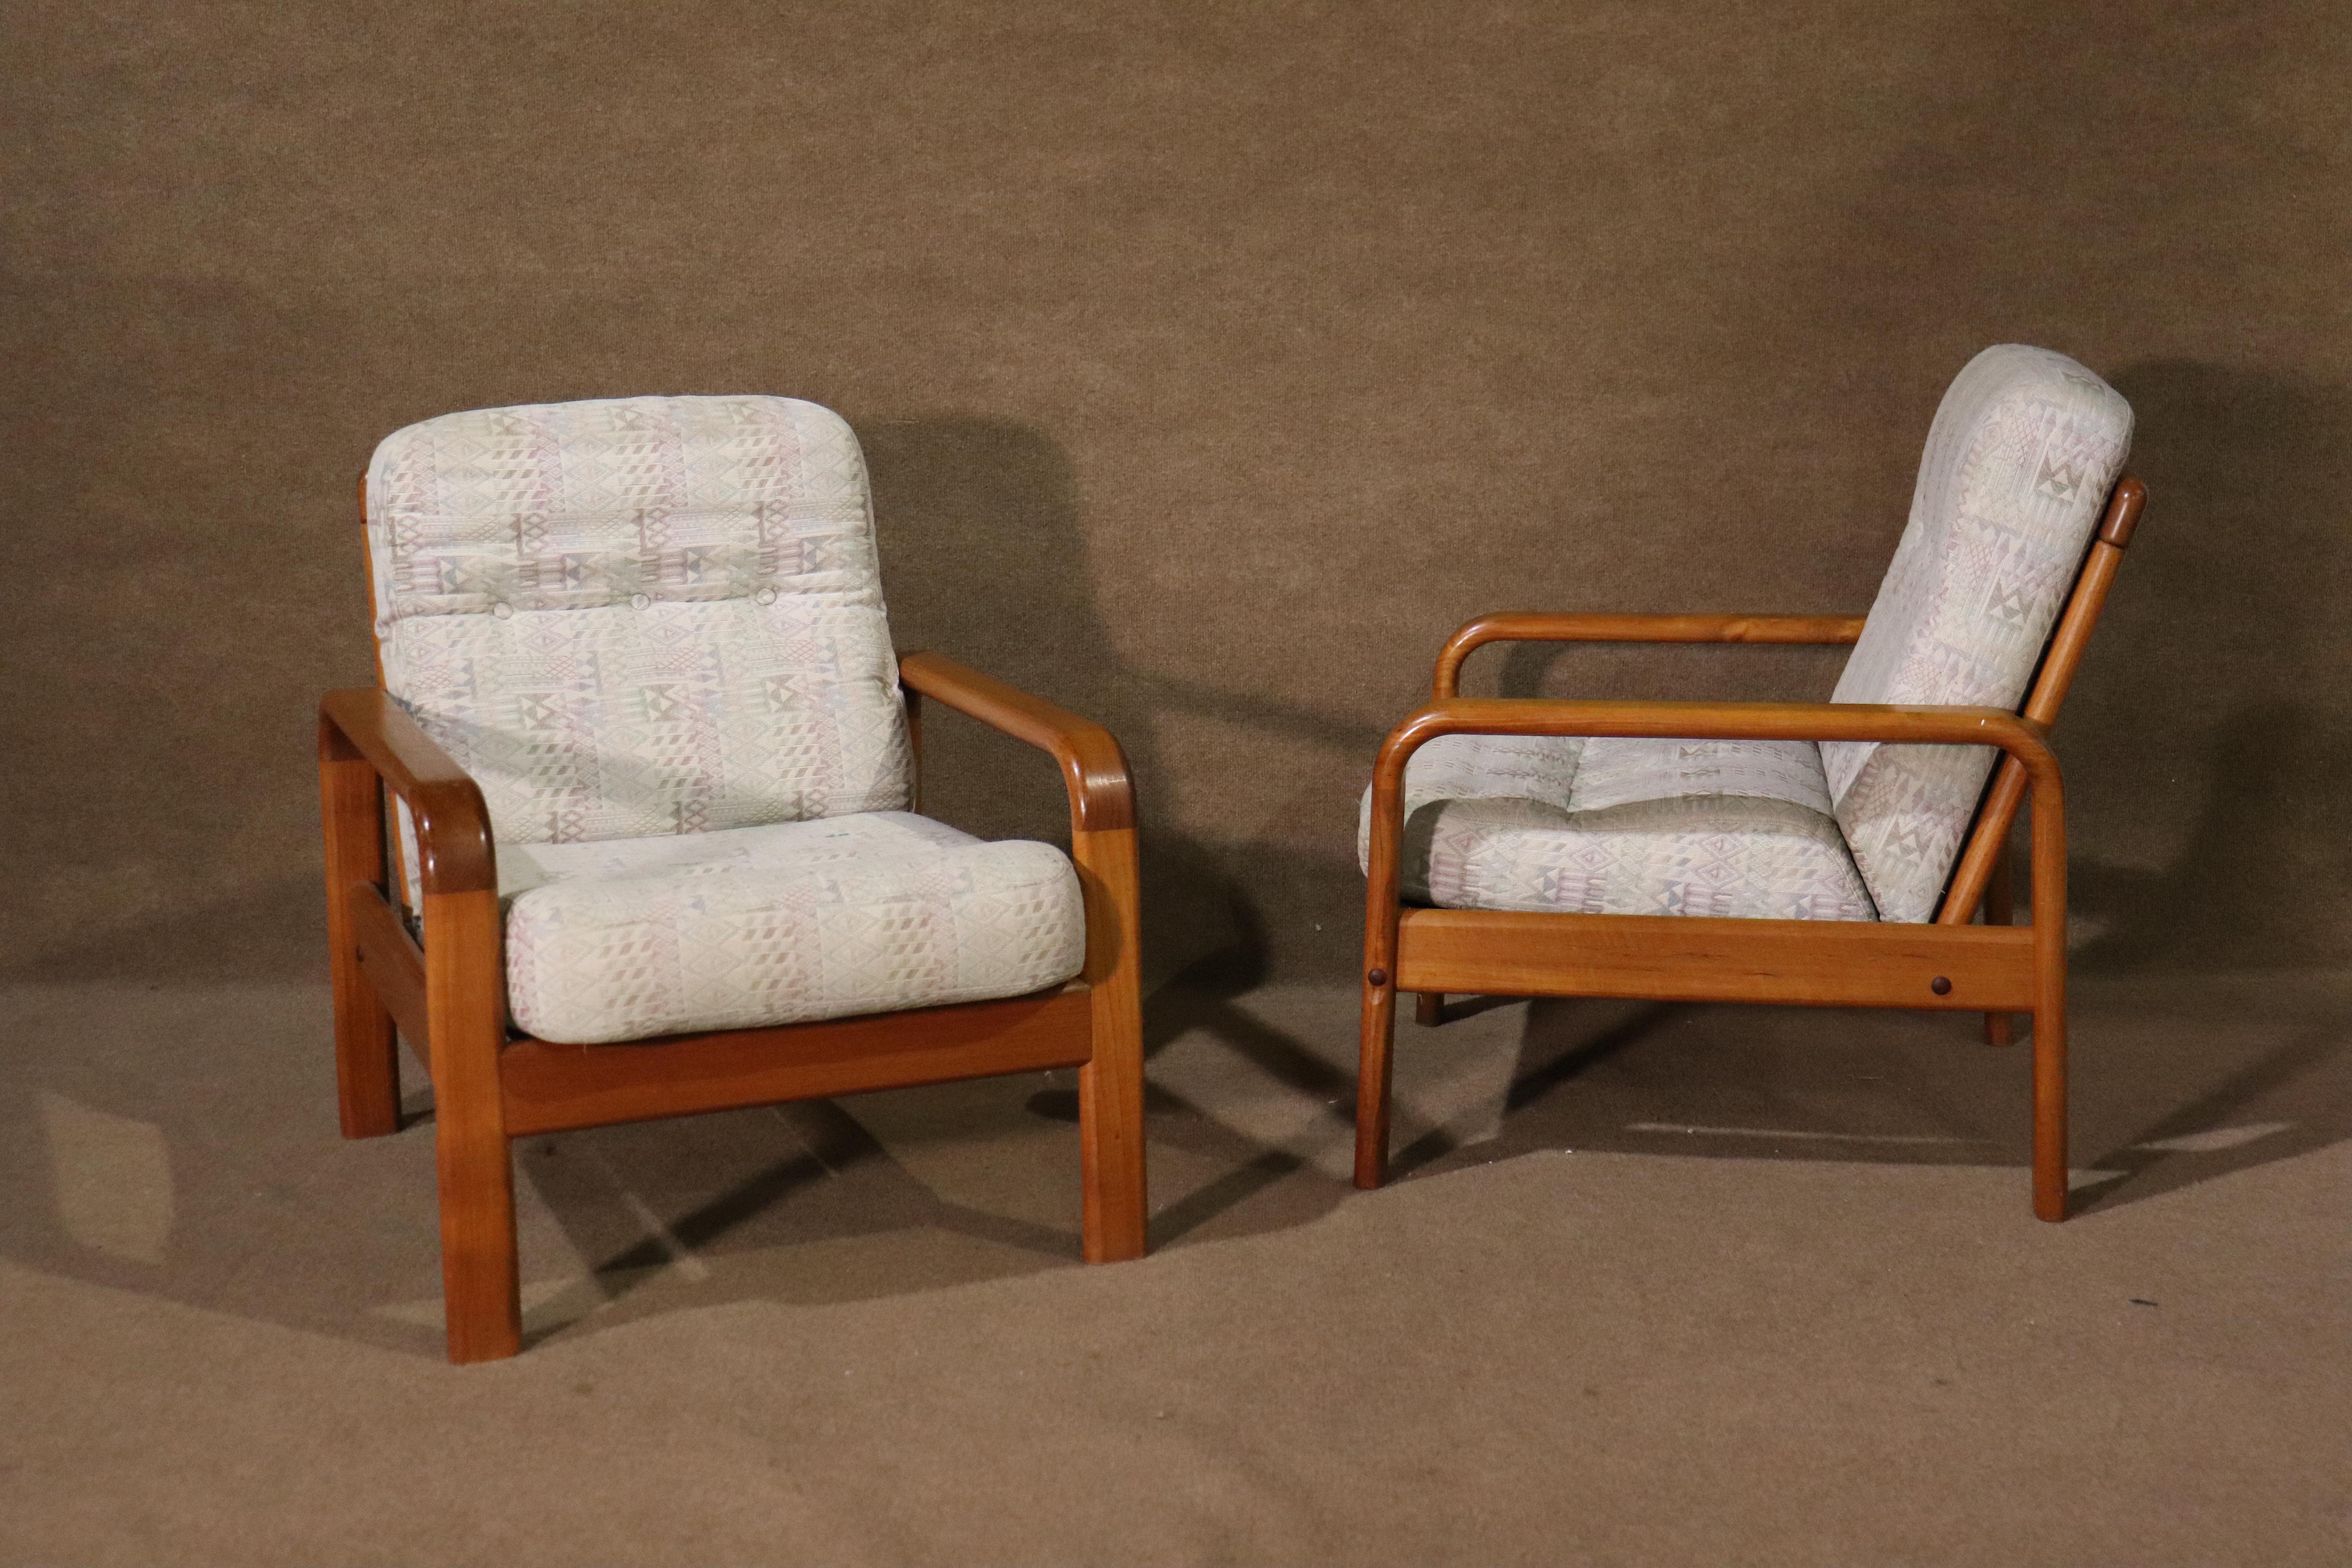 Danish Teak Lounge Chairs In Good Condition For Sale In Brooklyn, NY